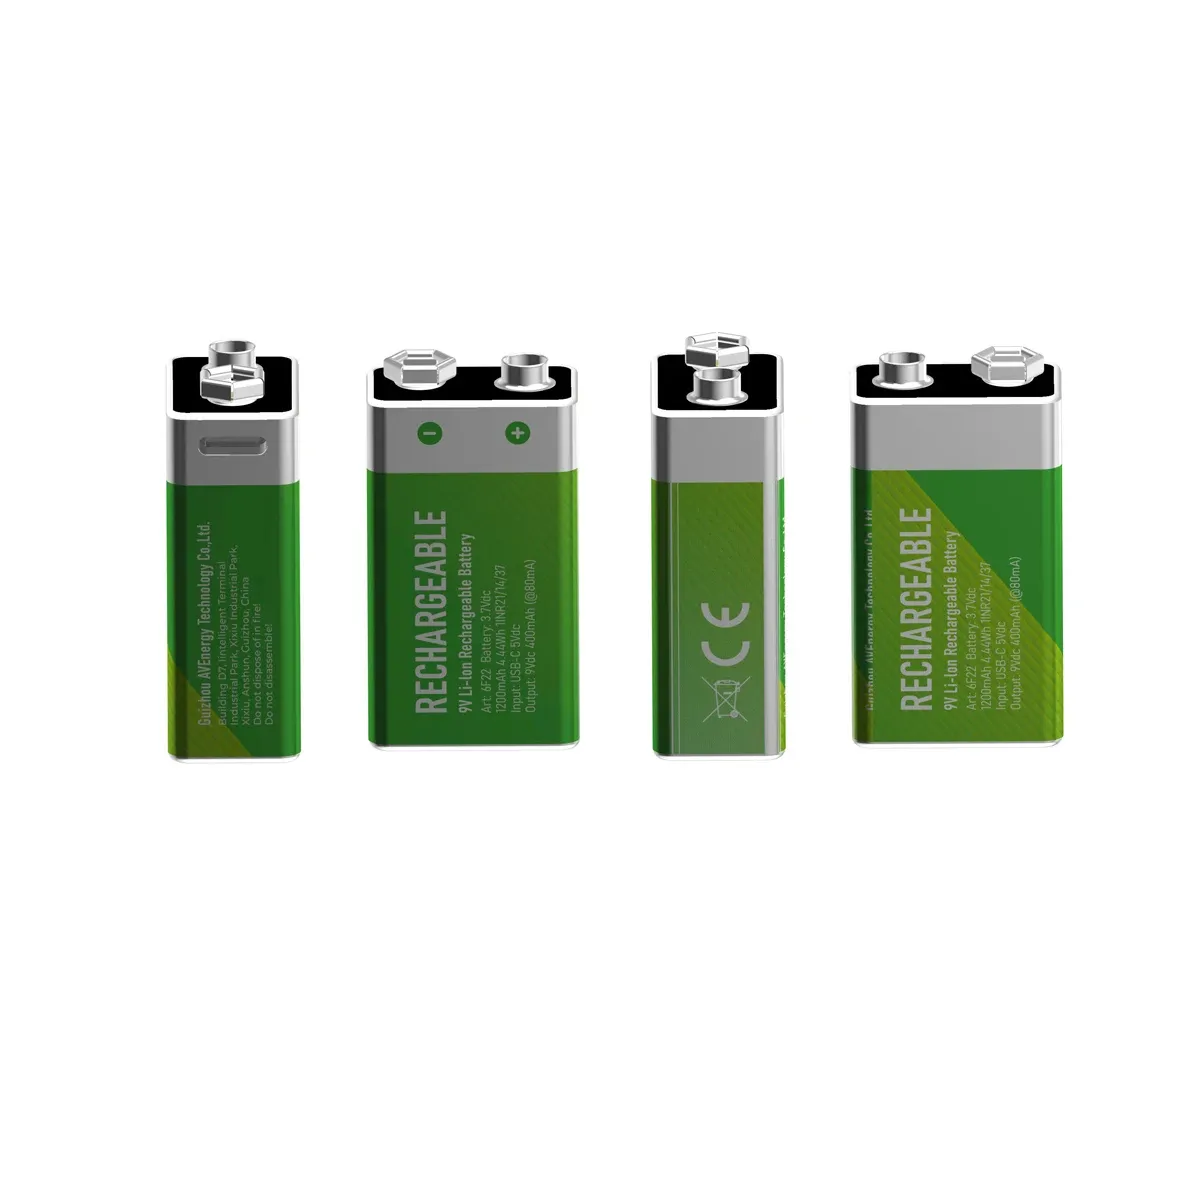 Rechargeable 9v Type C Usb Lithium Ion Battery 4500 mWh 6f22 Li-ion Battery